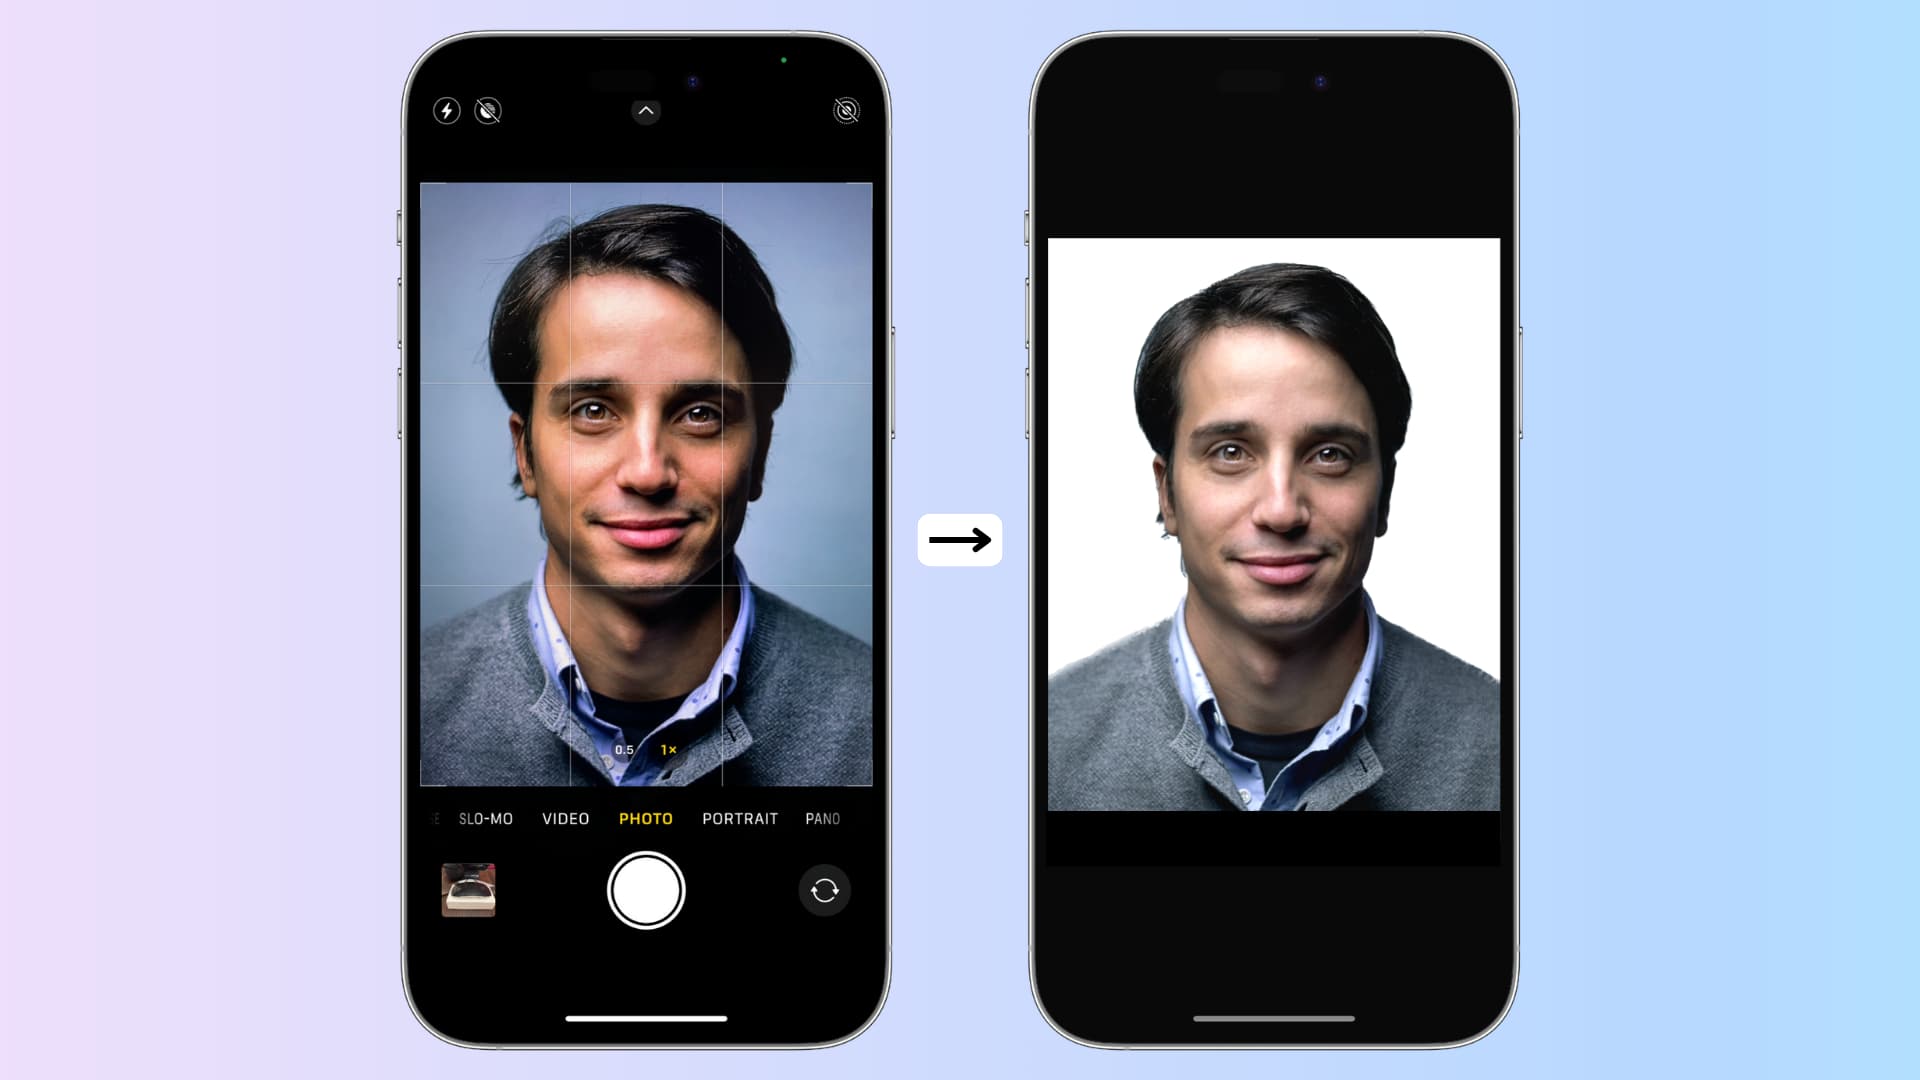 Two iPhone mockups showing passport or id card photo